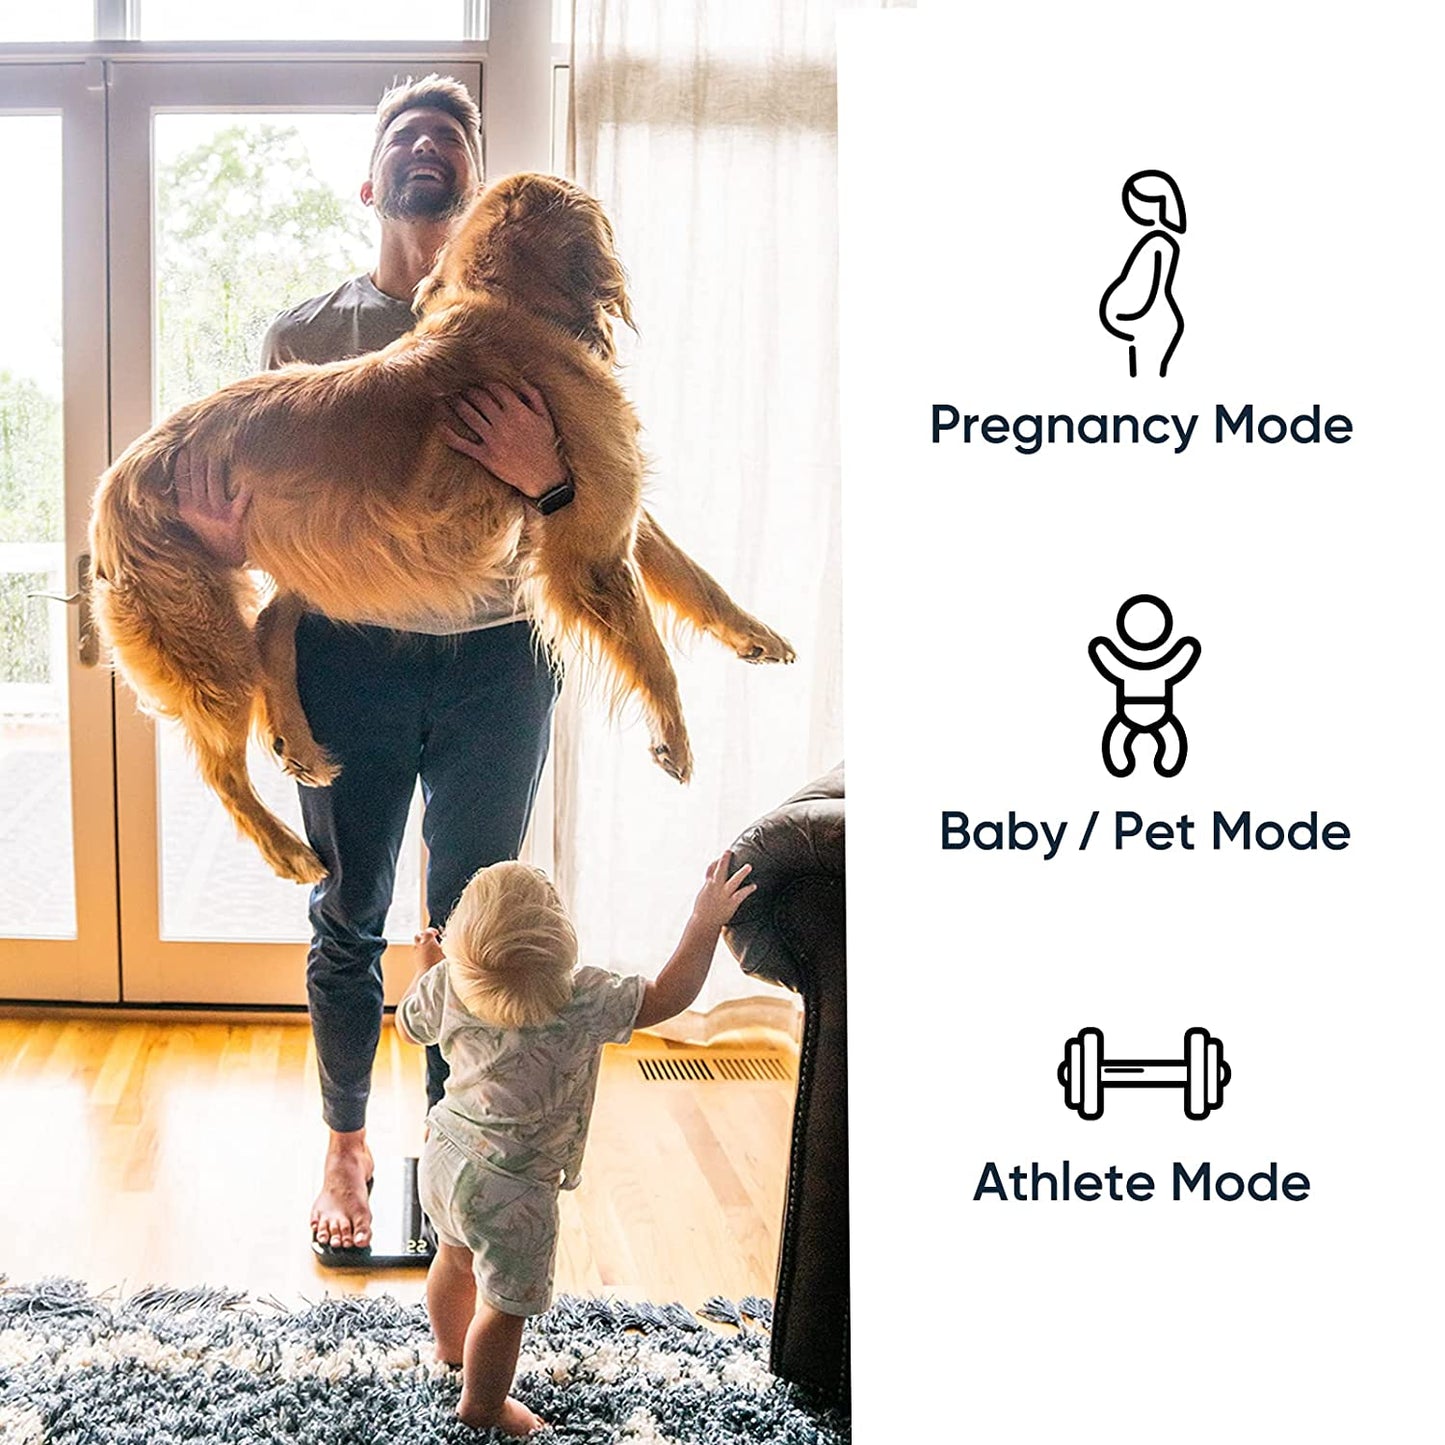 Man holding a dog and standing on scale. Text overlay says, "Pregnancy mode, baby mode, pet mode, athlete mode."